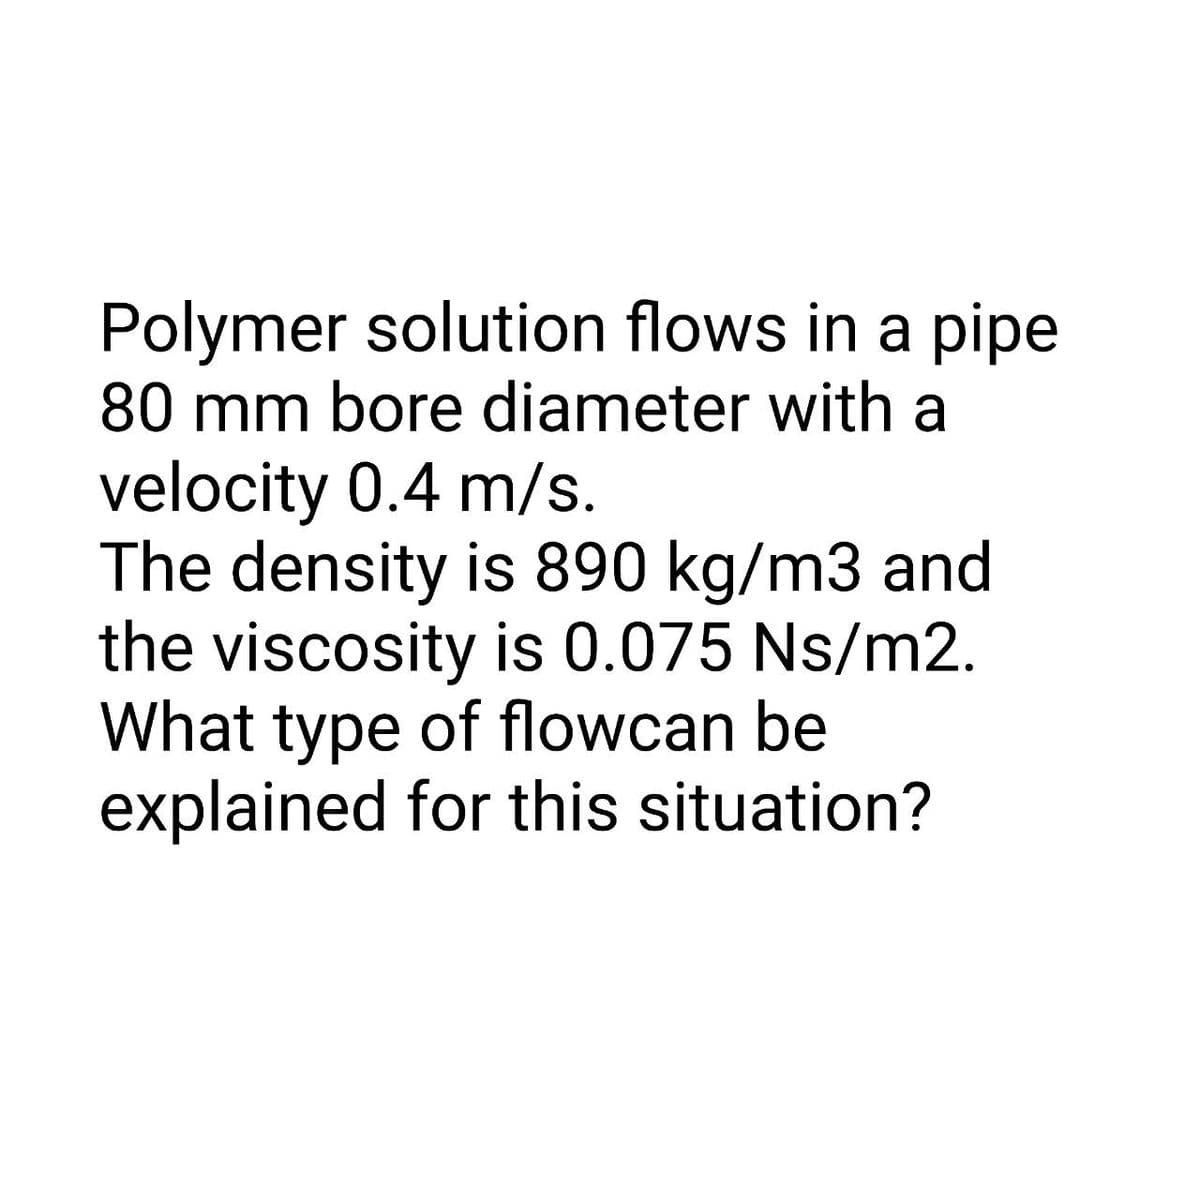 Polymer solution flows in a pipe
80 mm bore diameter with a
velocity 0.4 m/s.
The density is 890 kg/m3 and
the viscosity is 0.075 Ns/m2.
What type of flowcan be
explained for this situation?
